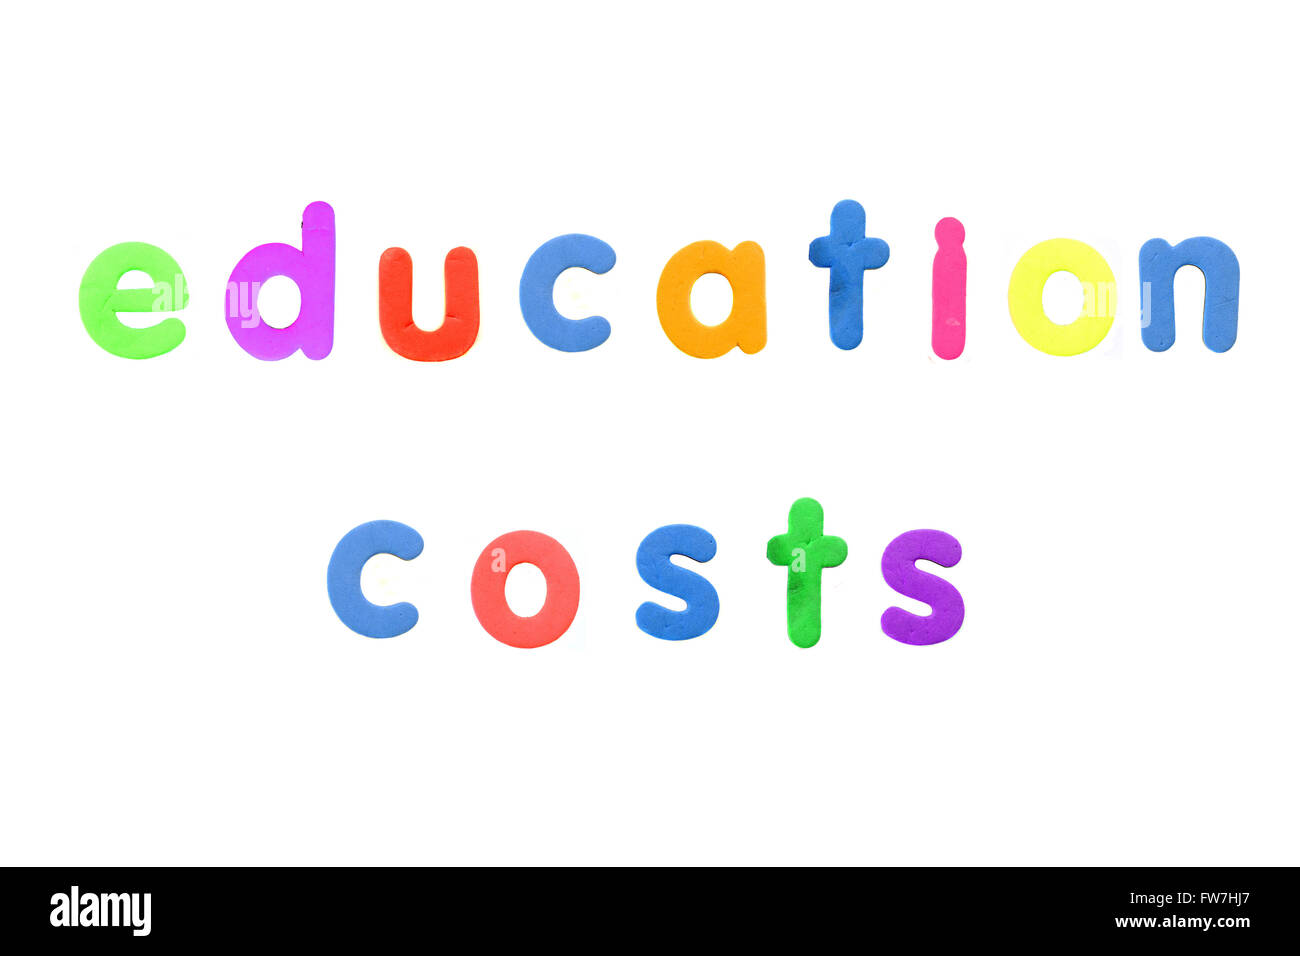 The words Education Costs created from magnetic fridge alphabet pieces photographed against a white background. Stock Photo